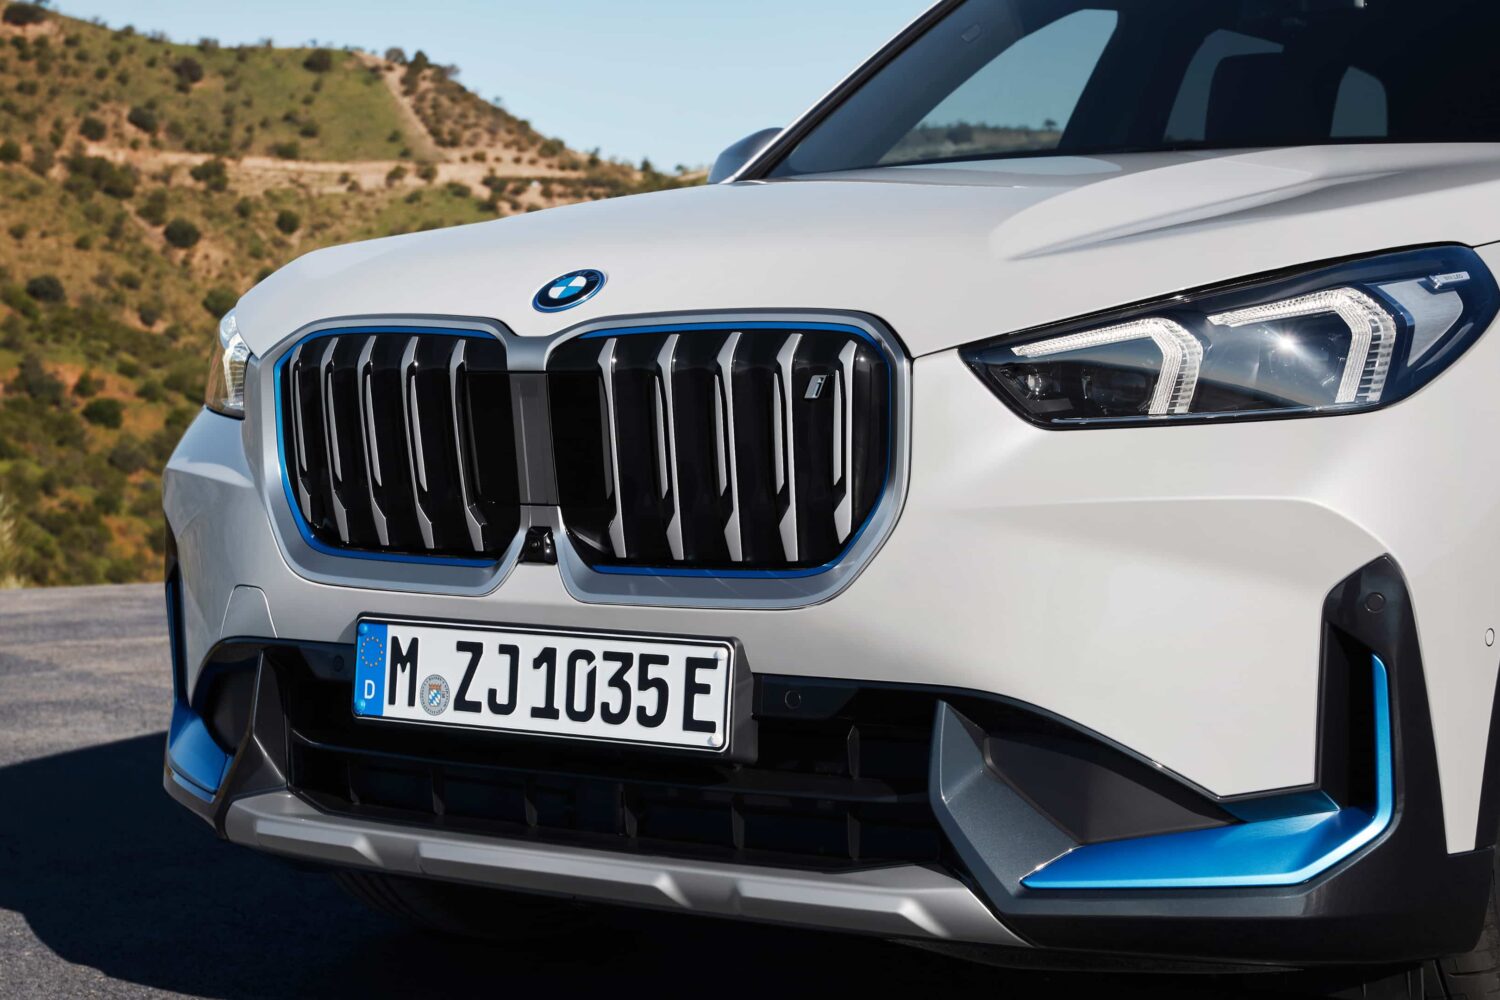 The front side of the BMW iX1, the company's first all-electric SUV, is showcased on this marketing photo